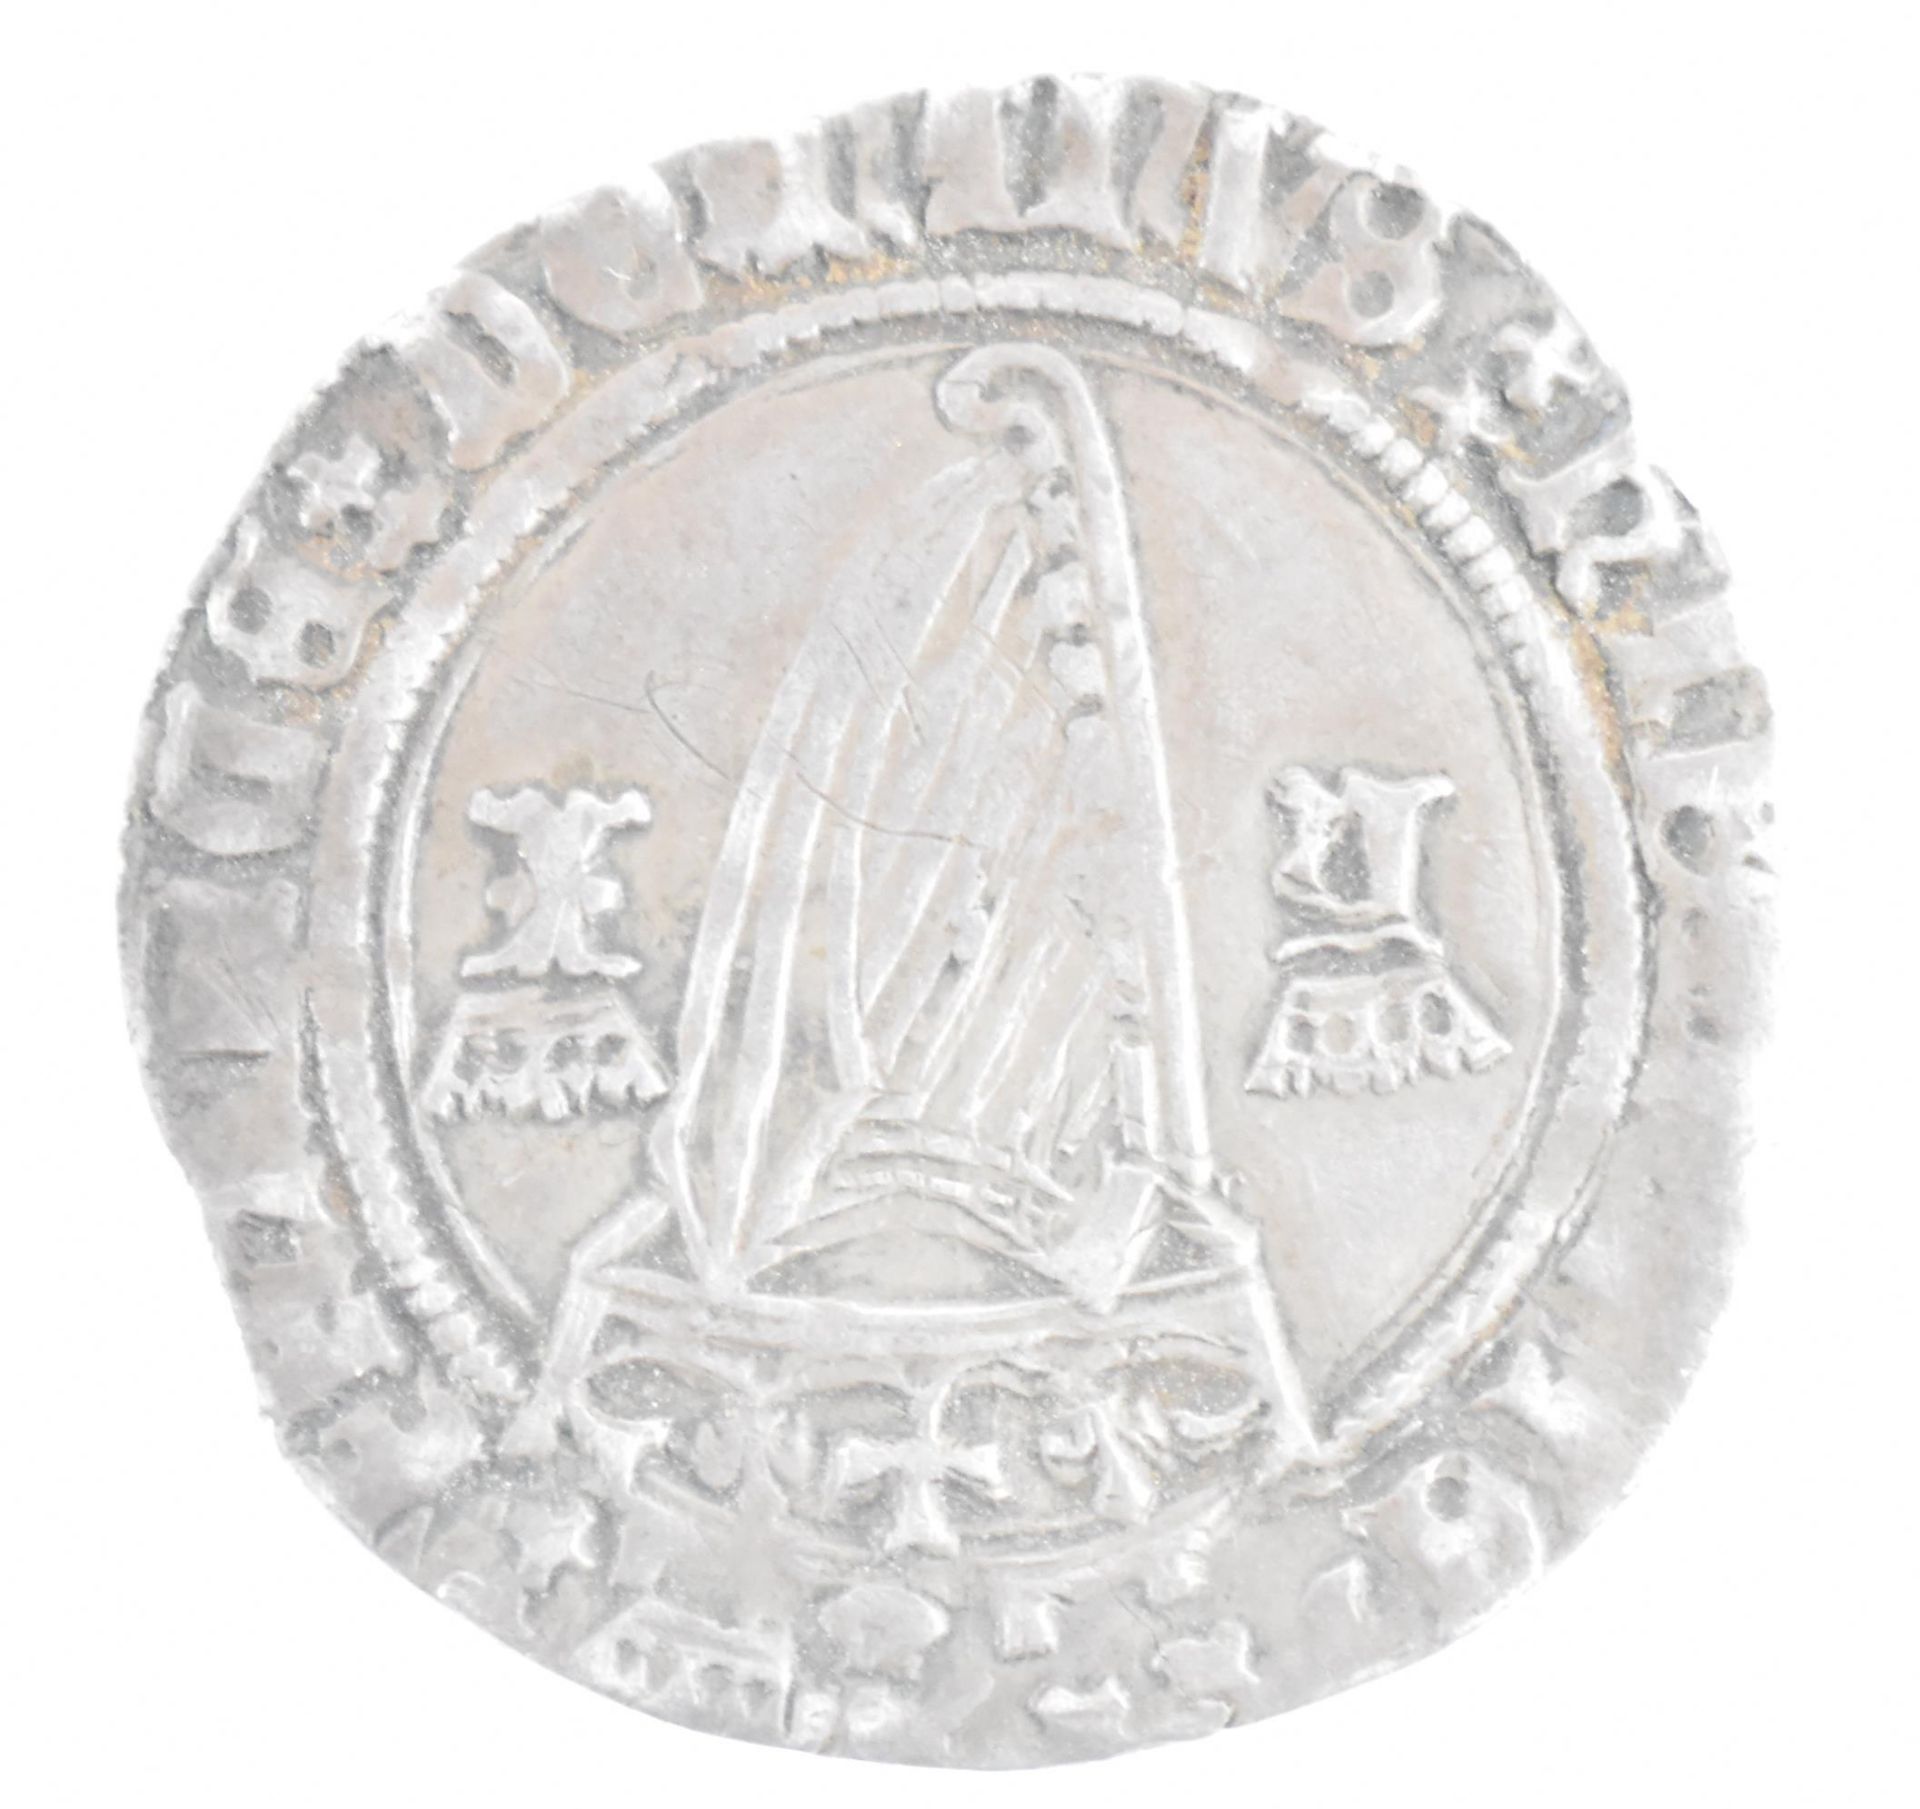 16TH CENTURY HENRY VIII HAMMERED SILVER GROAT COIN